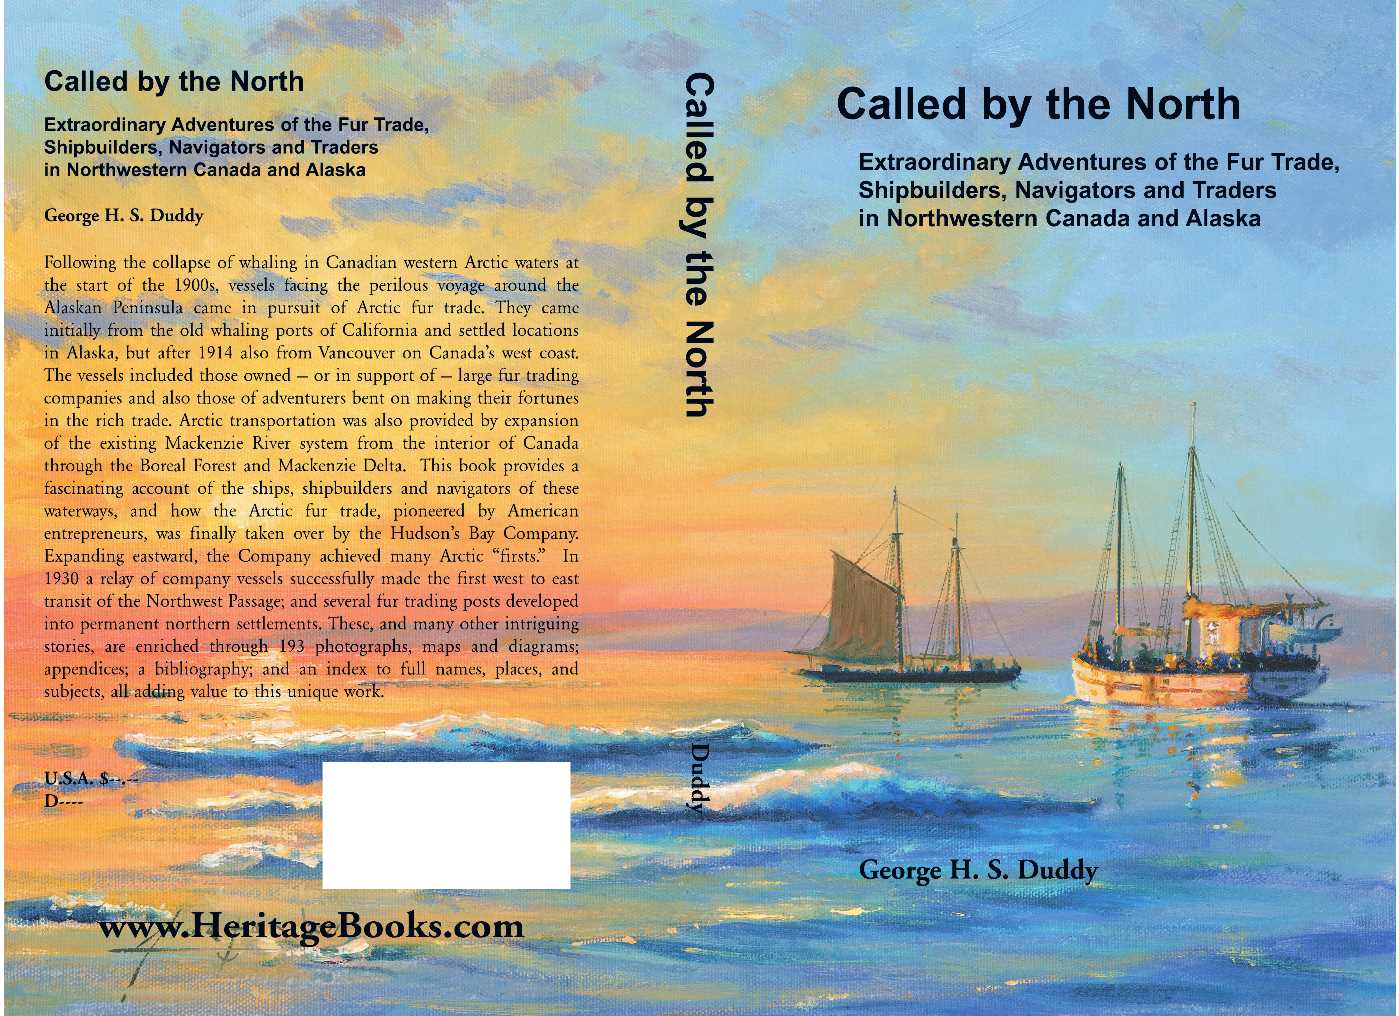 "Called by the North" cover - John M. Horton